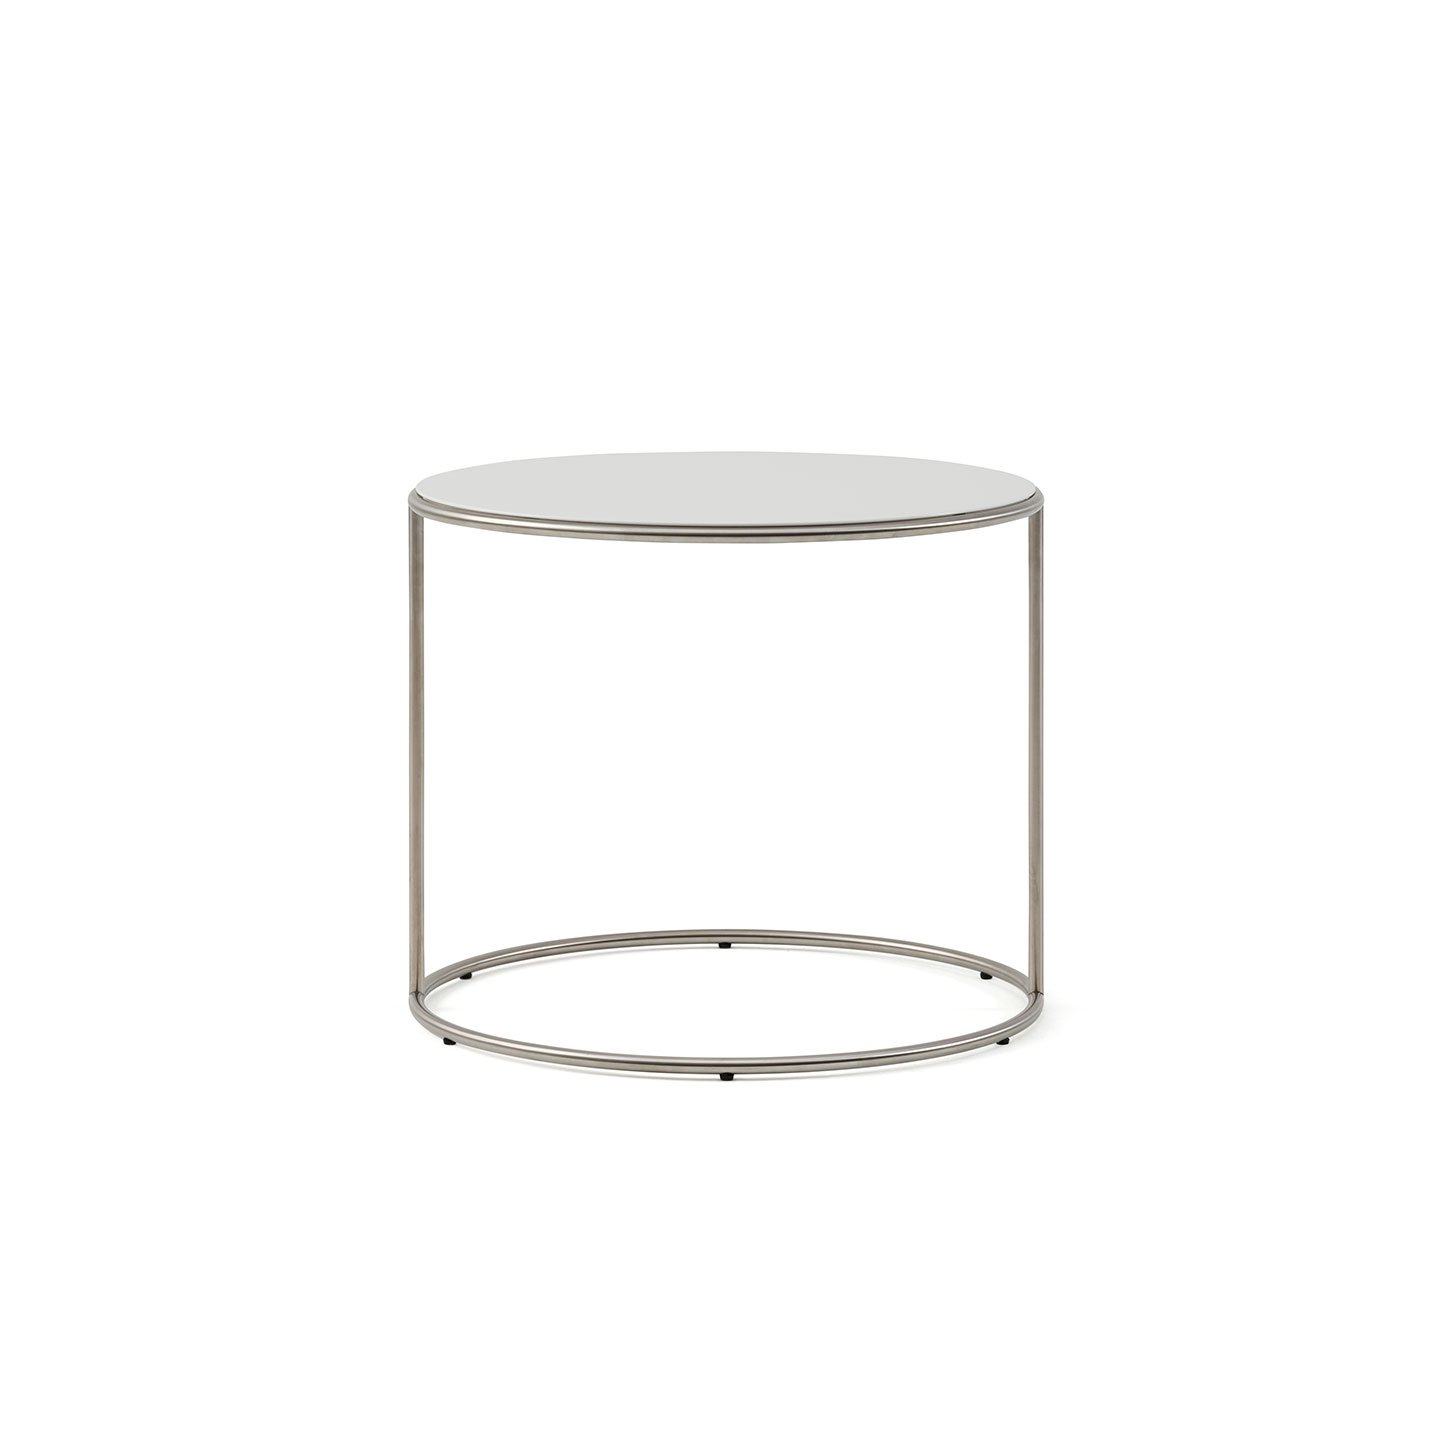 Haworth Cannot Table Circular top with matte magnolia finish